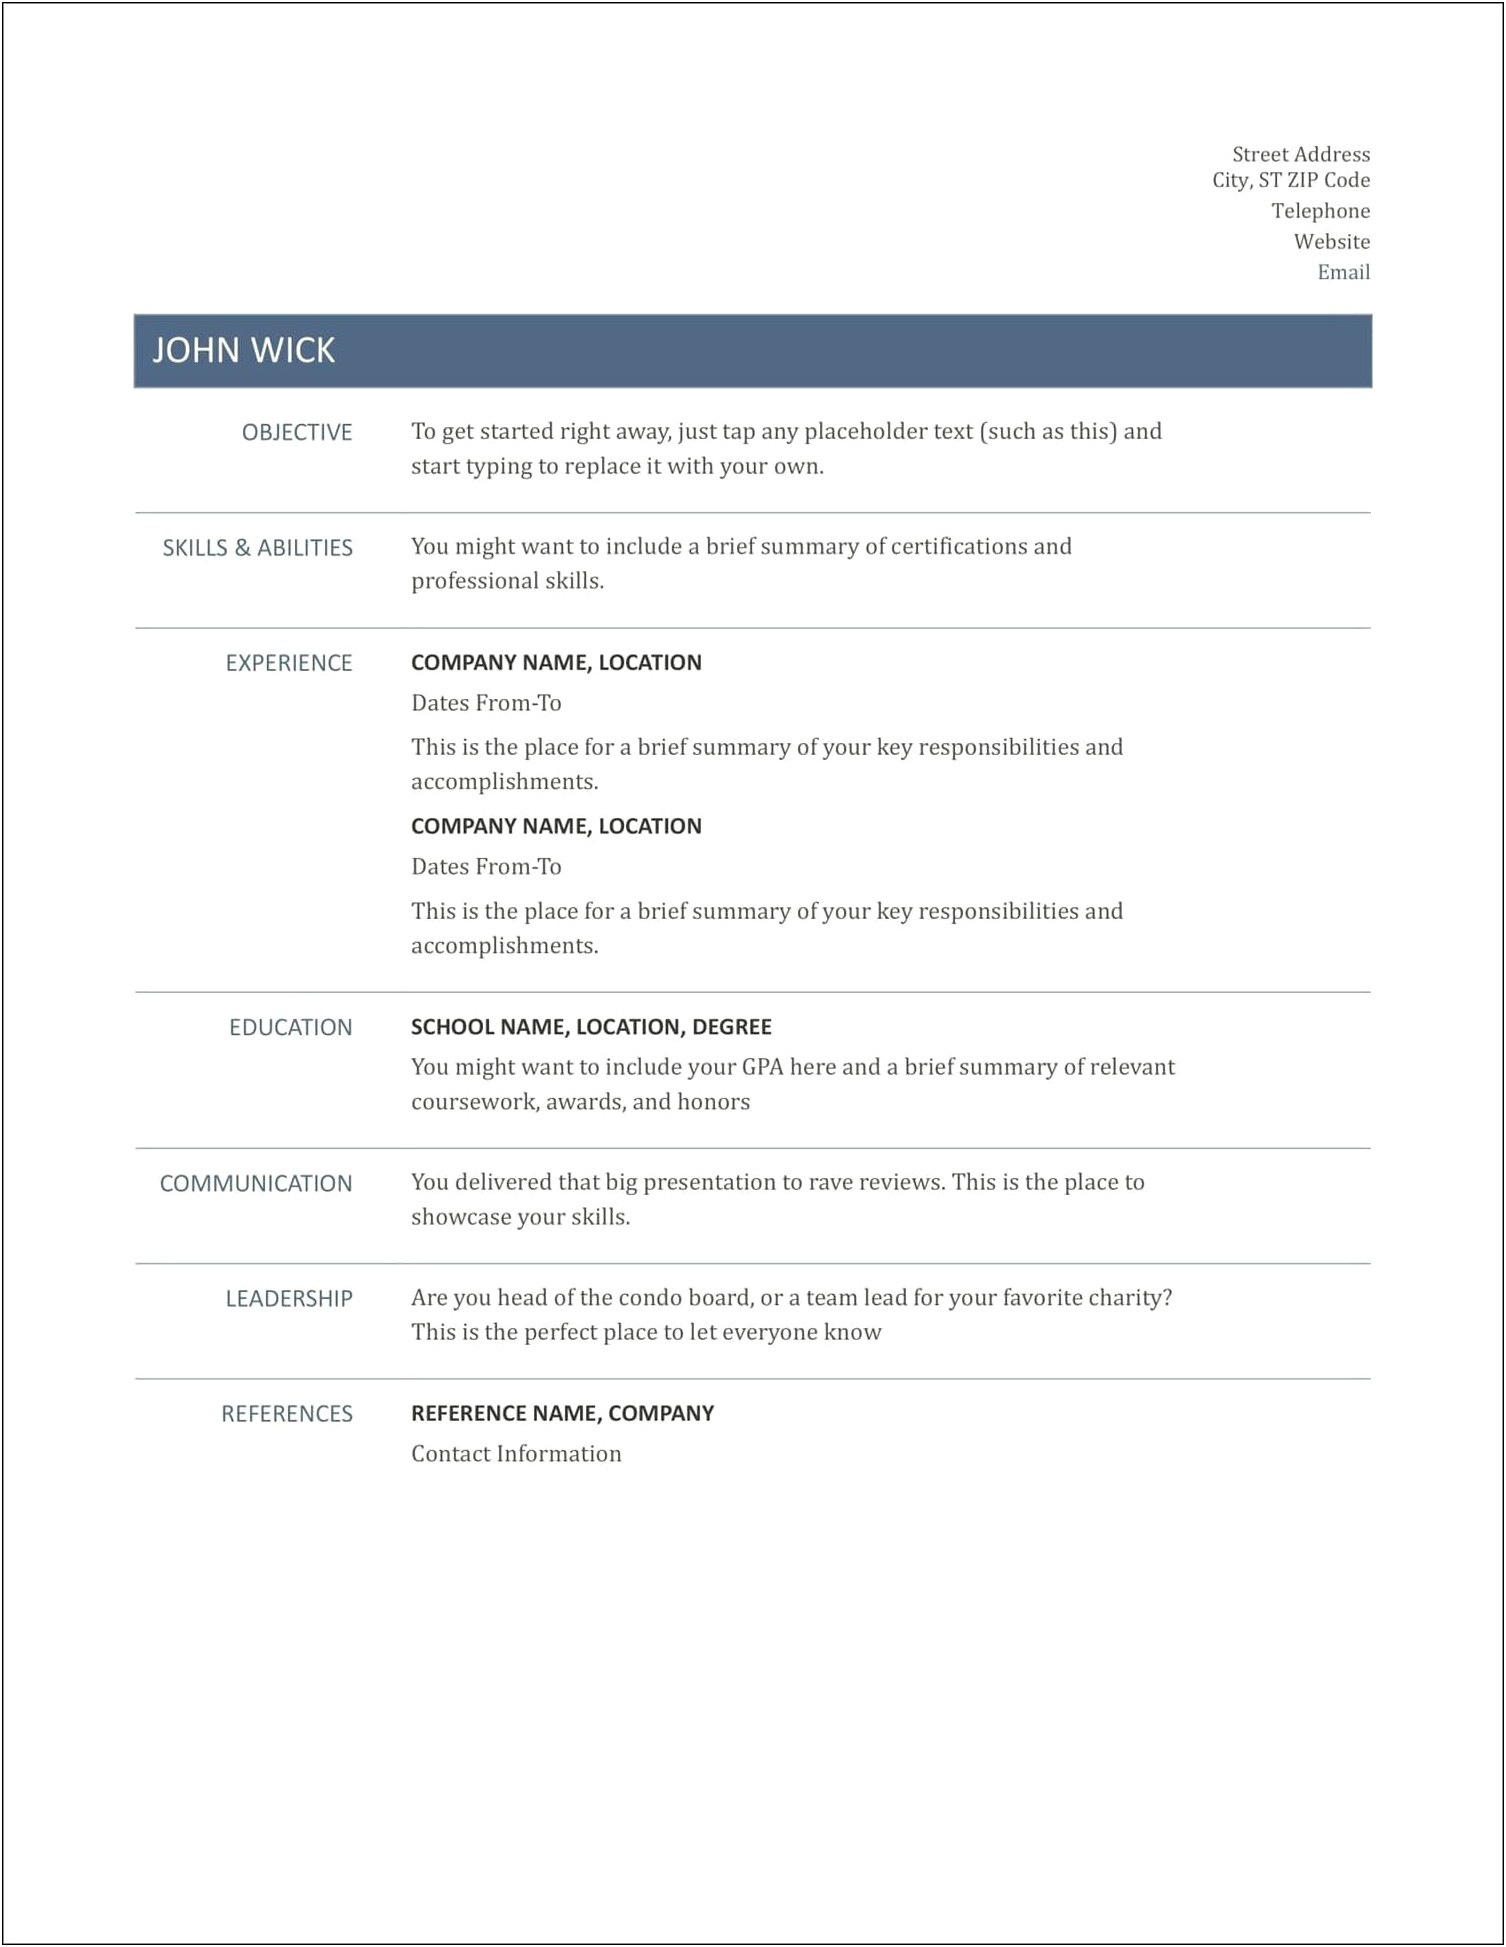 Can You Make Good Money With Resume Templates